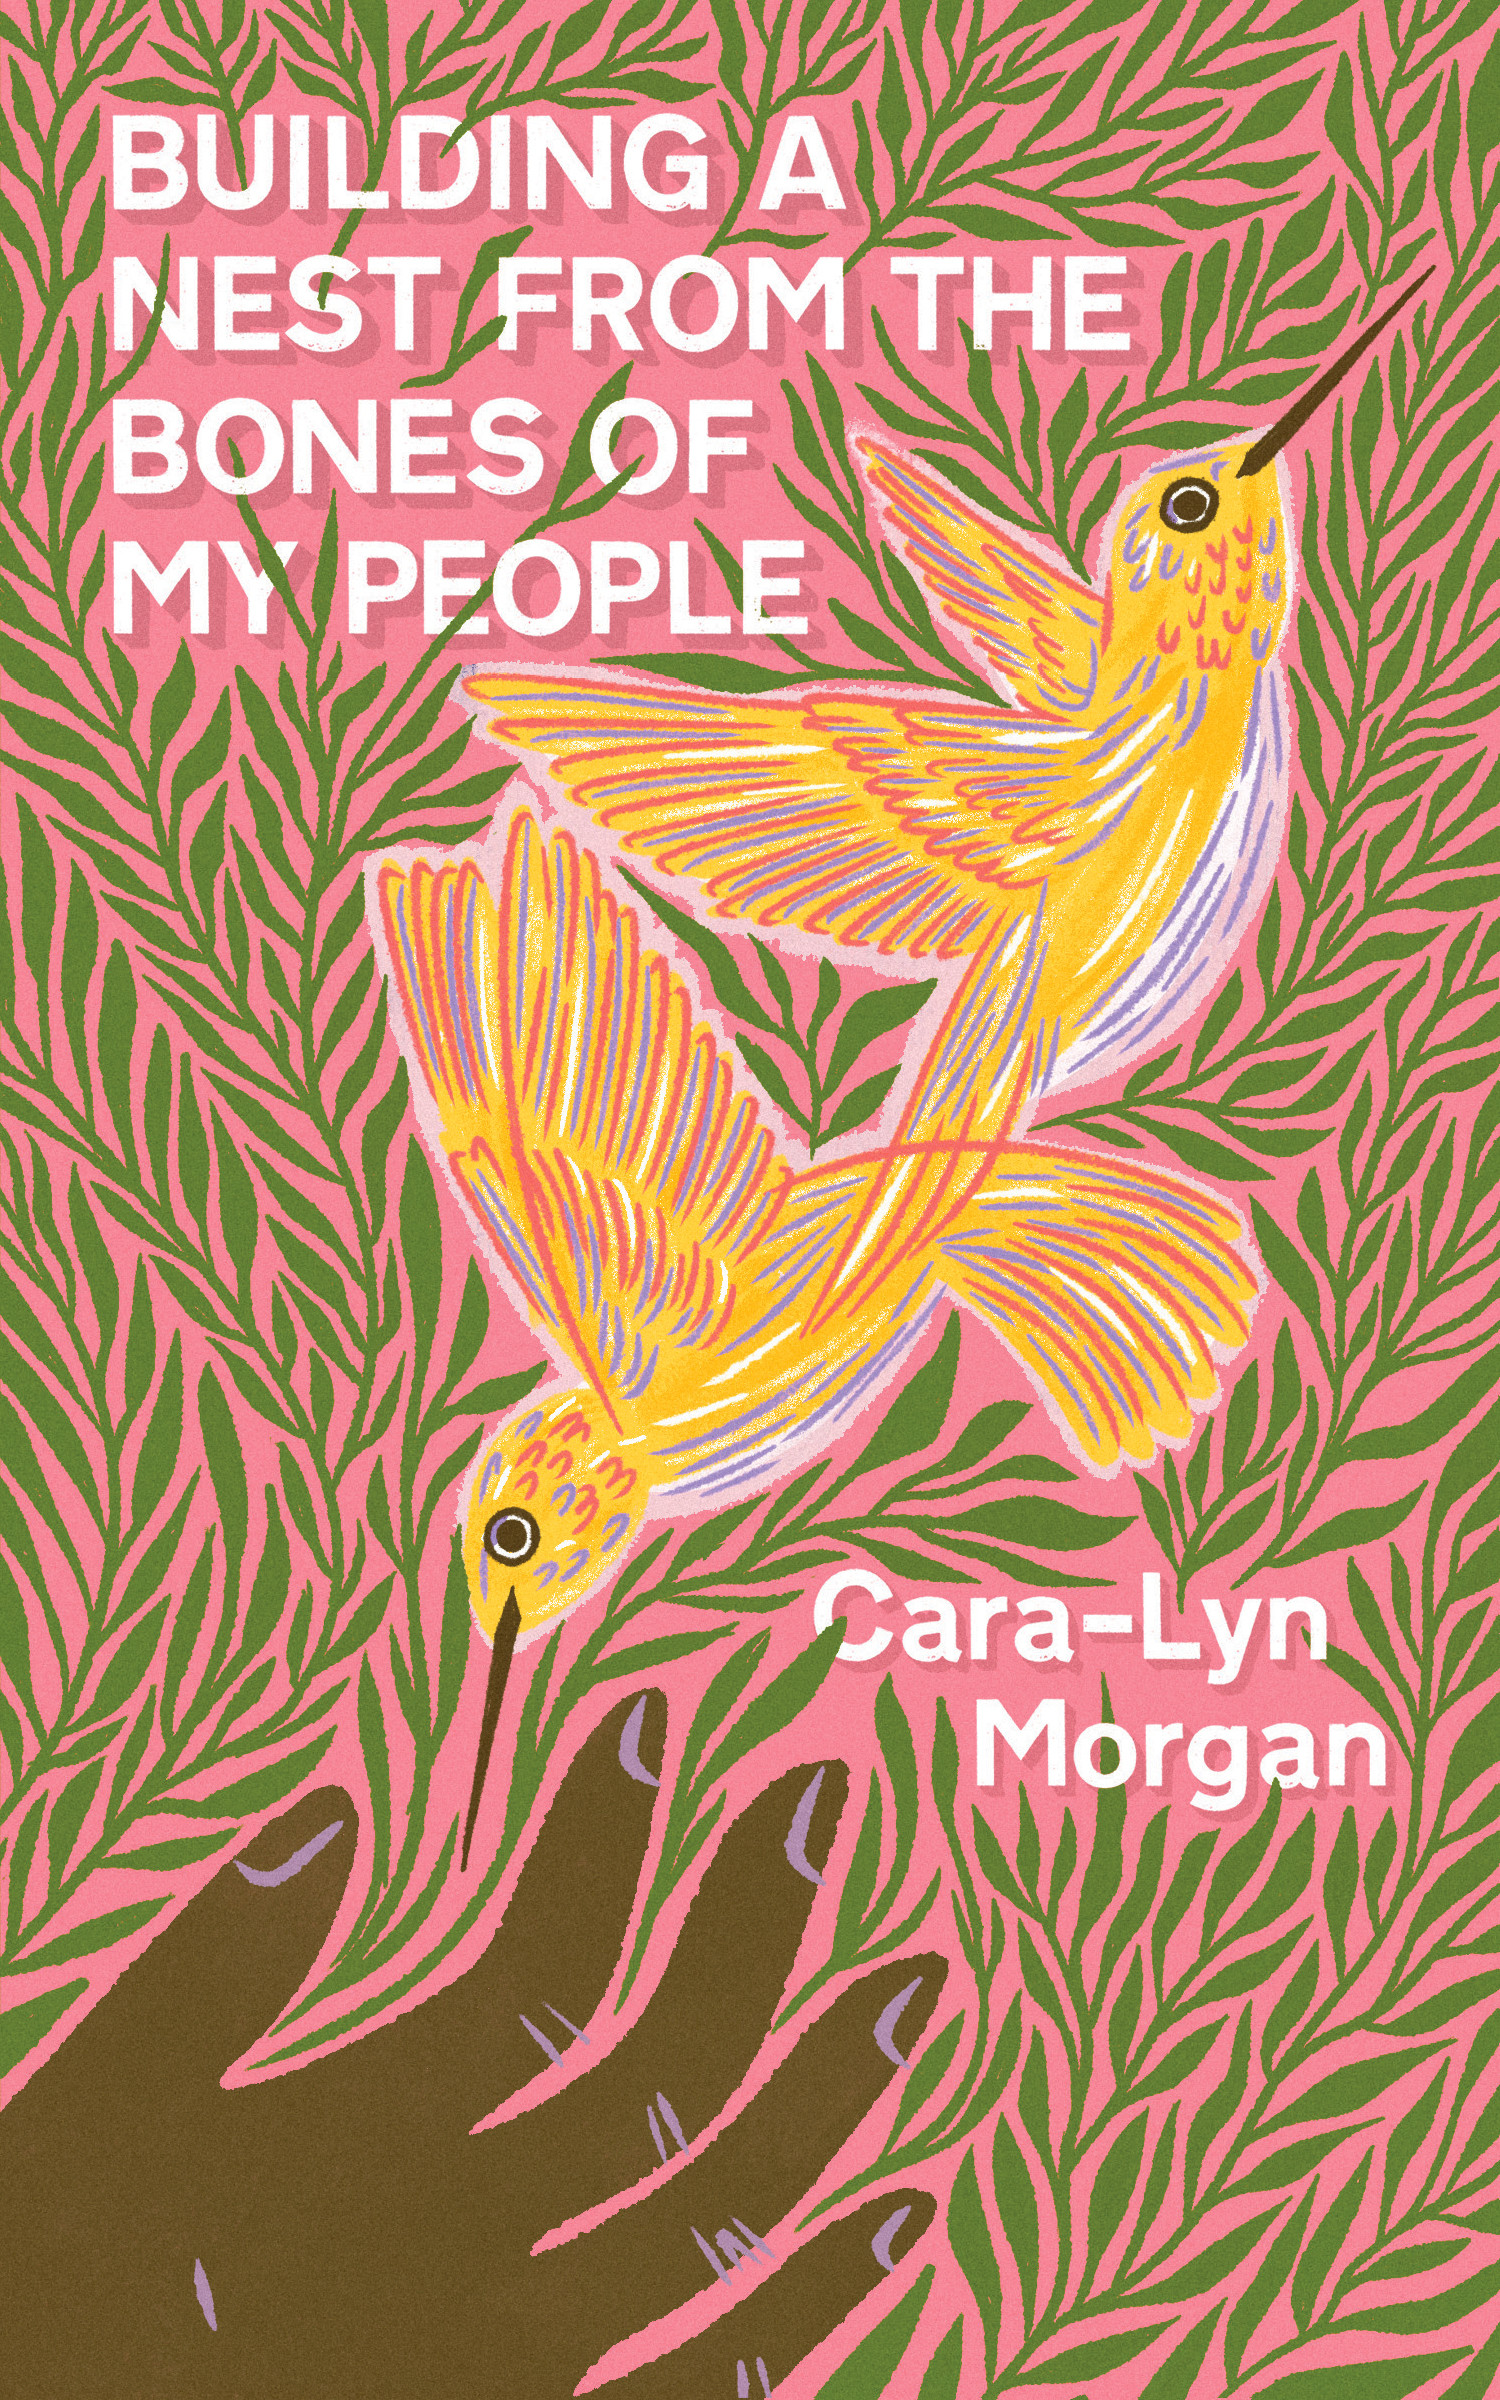 Cover of Building a Nest from the Bones of My People by Cara-Lyn Morgan